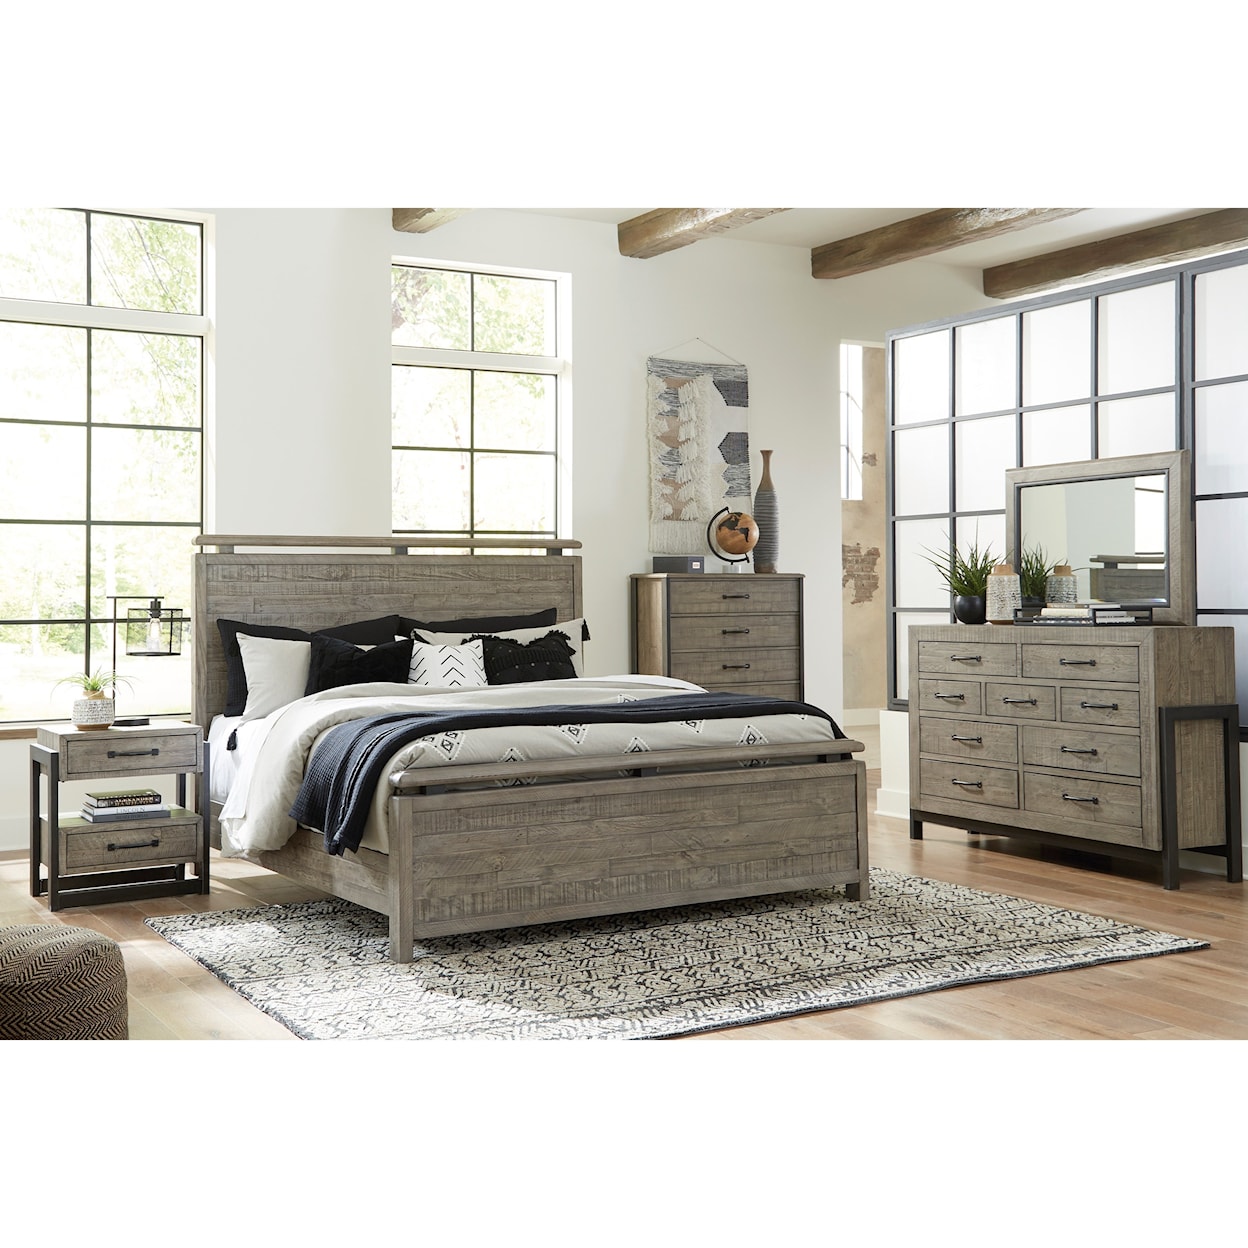 Signature Design by Ashley Furniture Brennagan Queen Bedroom Group